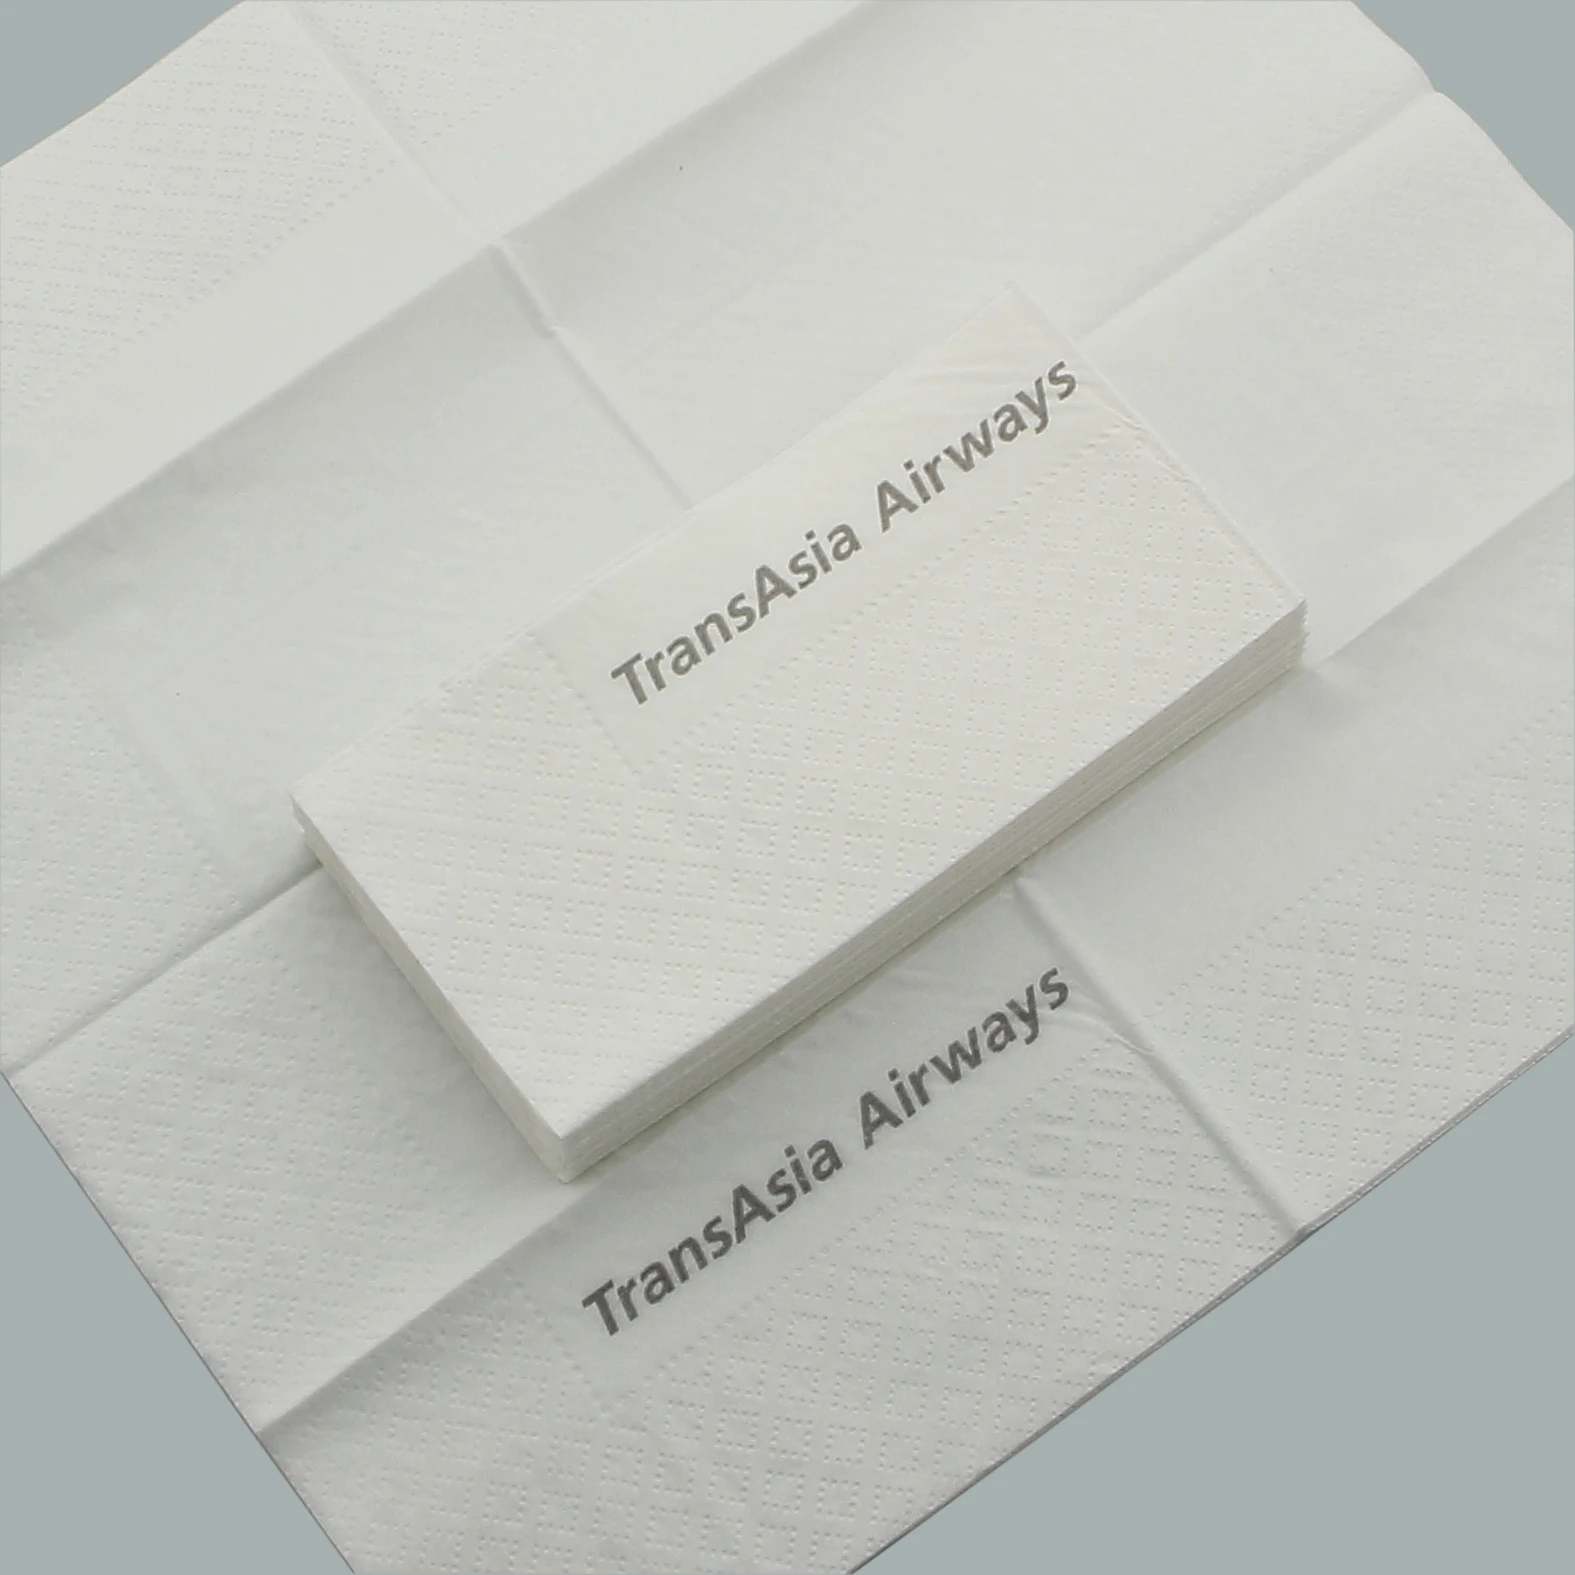 Customized dinner napkin Personalized dinner napkins 30cm 33cm 40cm napkin Virgin pulp Bamboo pulp Recycled pulp 1-2 color logo